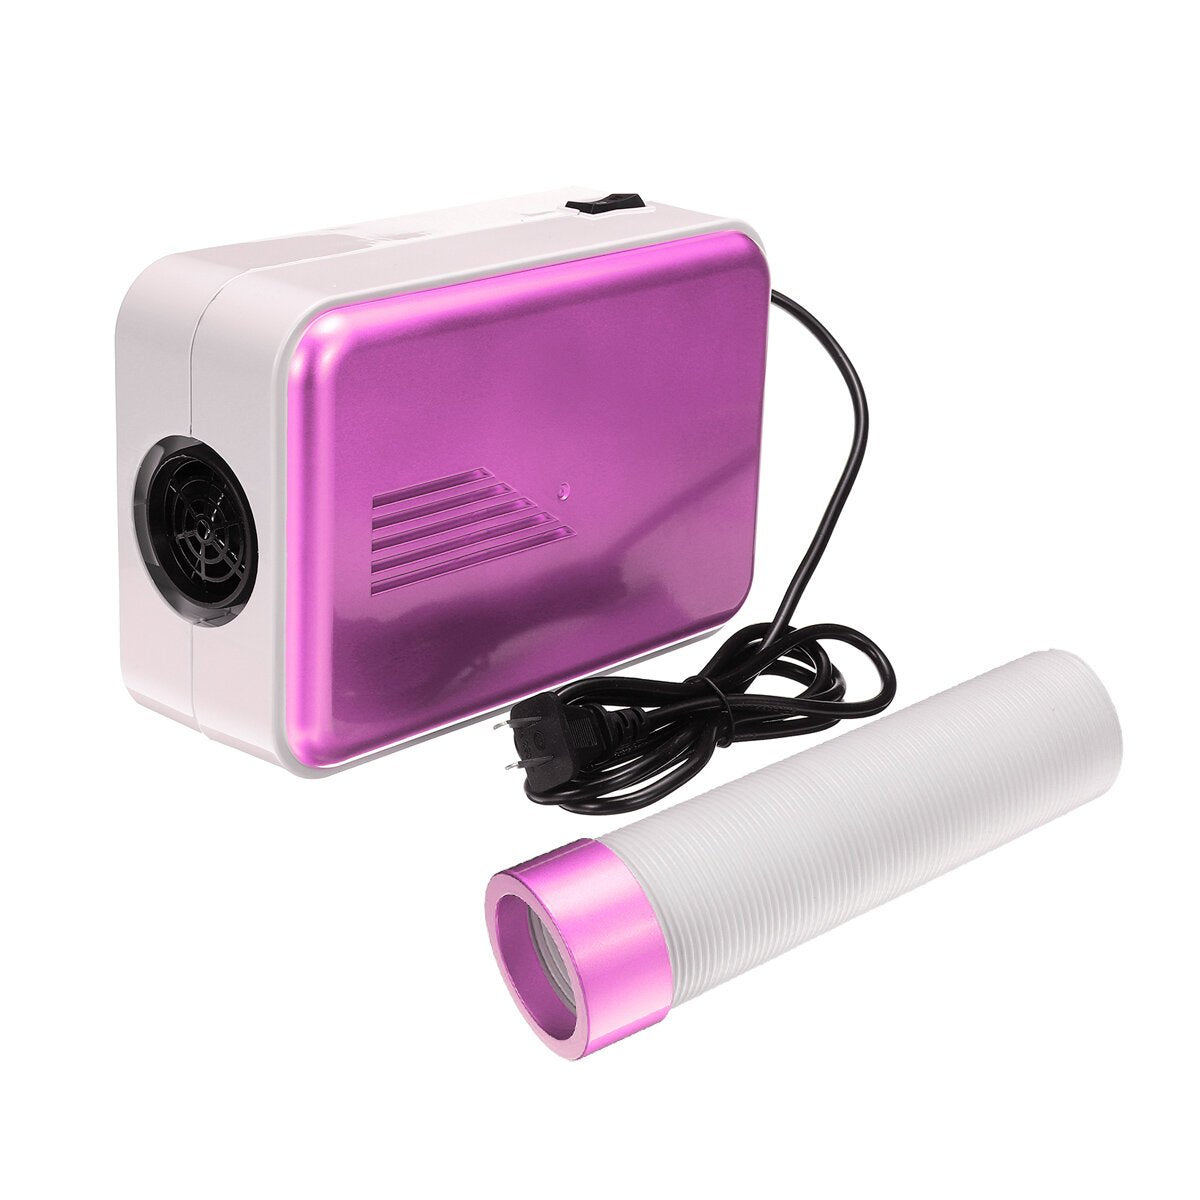 800W Portable Electric Clothes Pet Dryer Machine Folding Drying for Home Office Dormitory